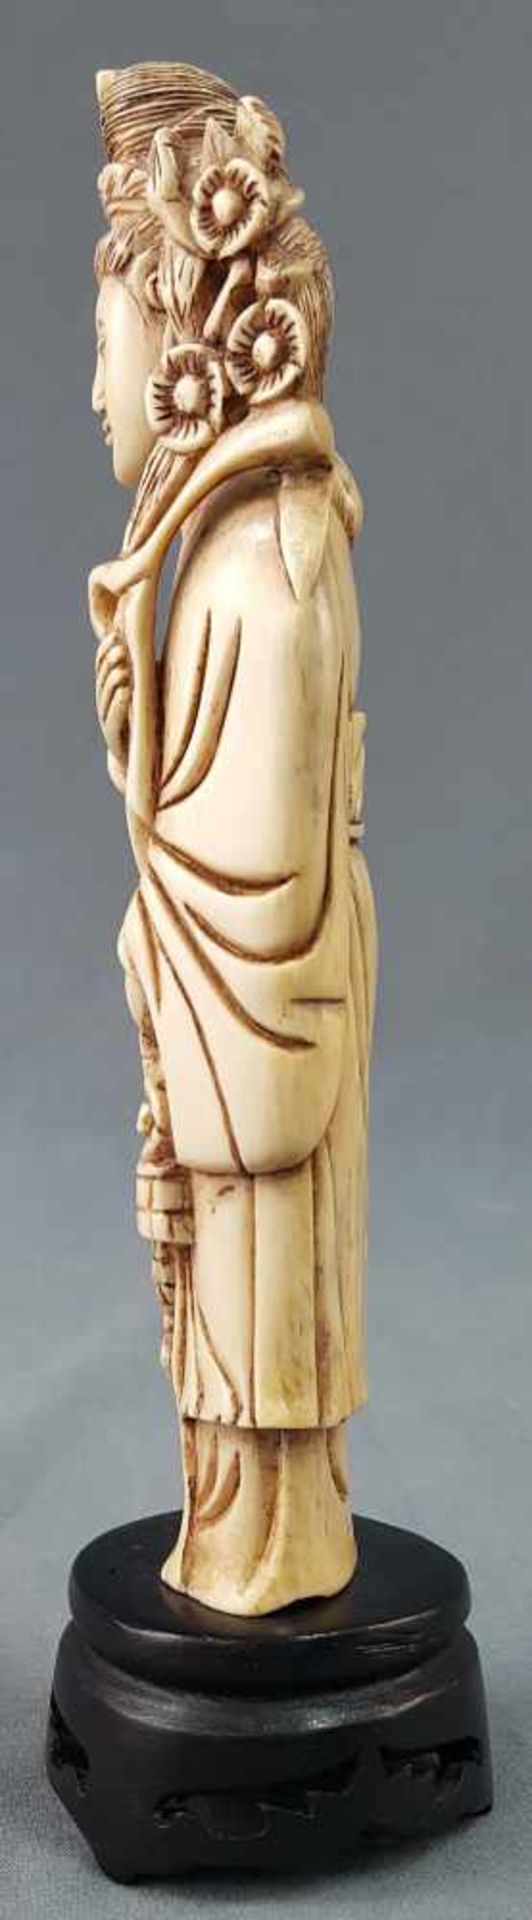 Lady with flowers. East Asia. China / Japan? Ivory. Old, around 1920. - Bild 2 aus 6